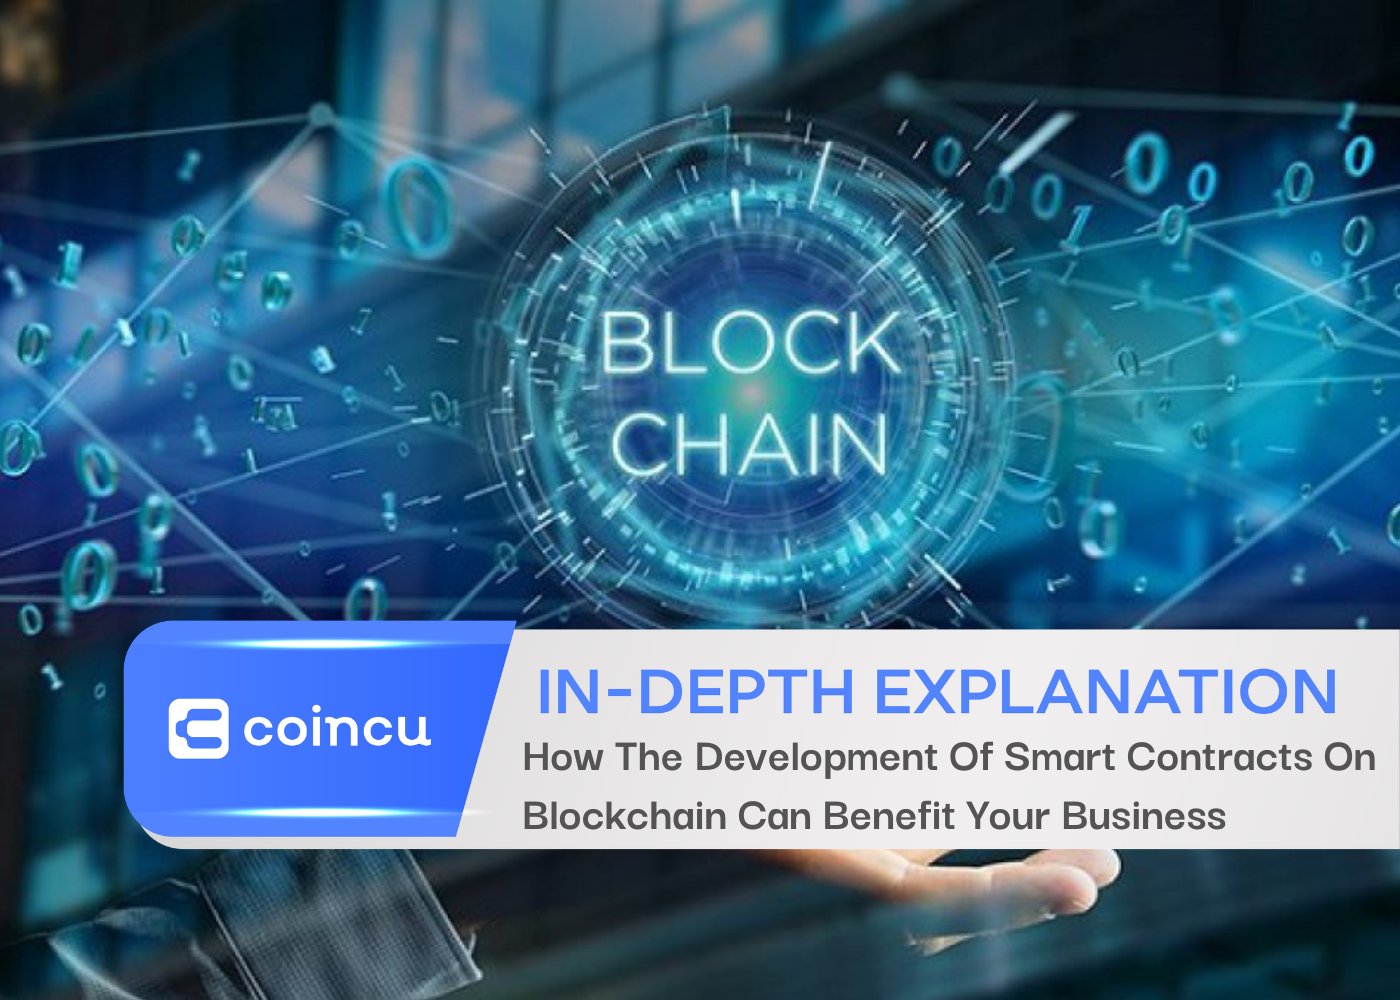 How The Development Of Smart Contracts On